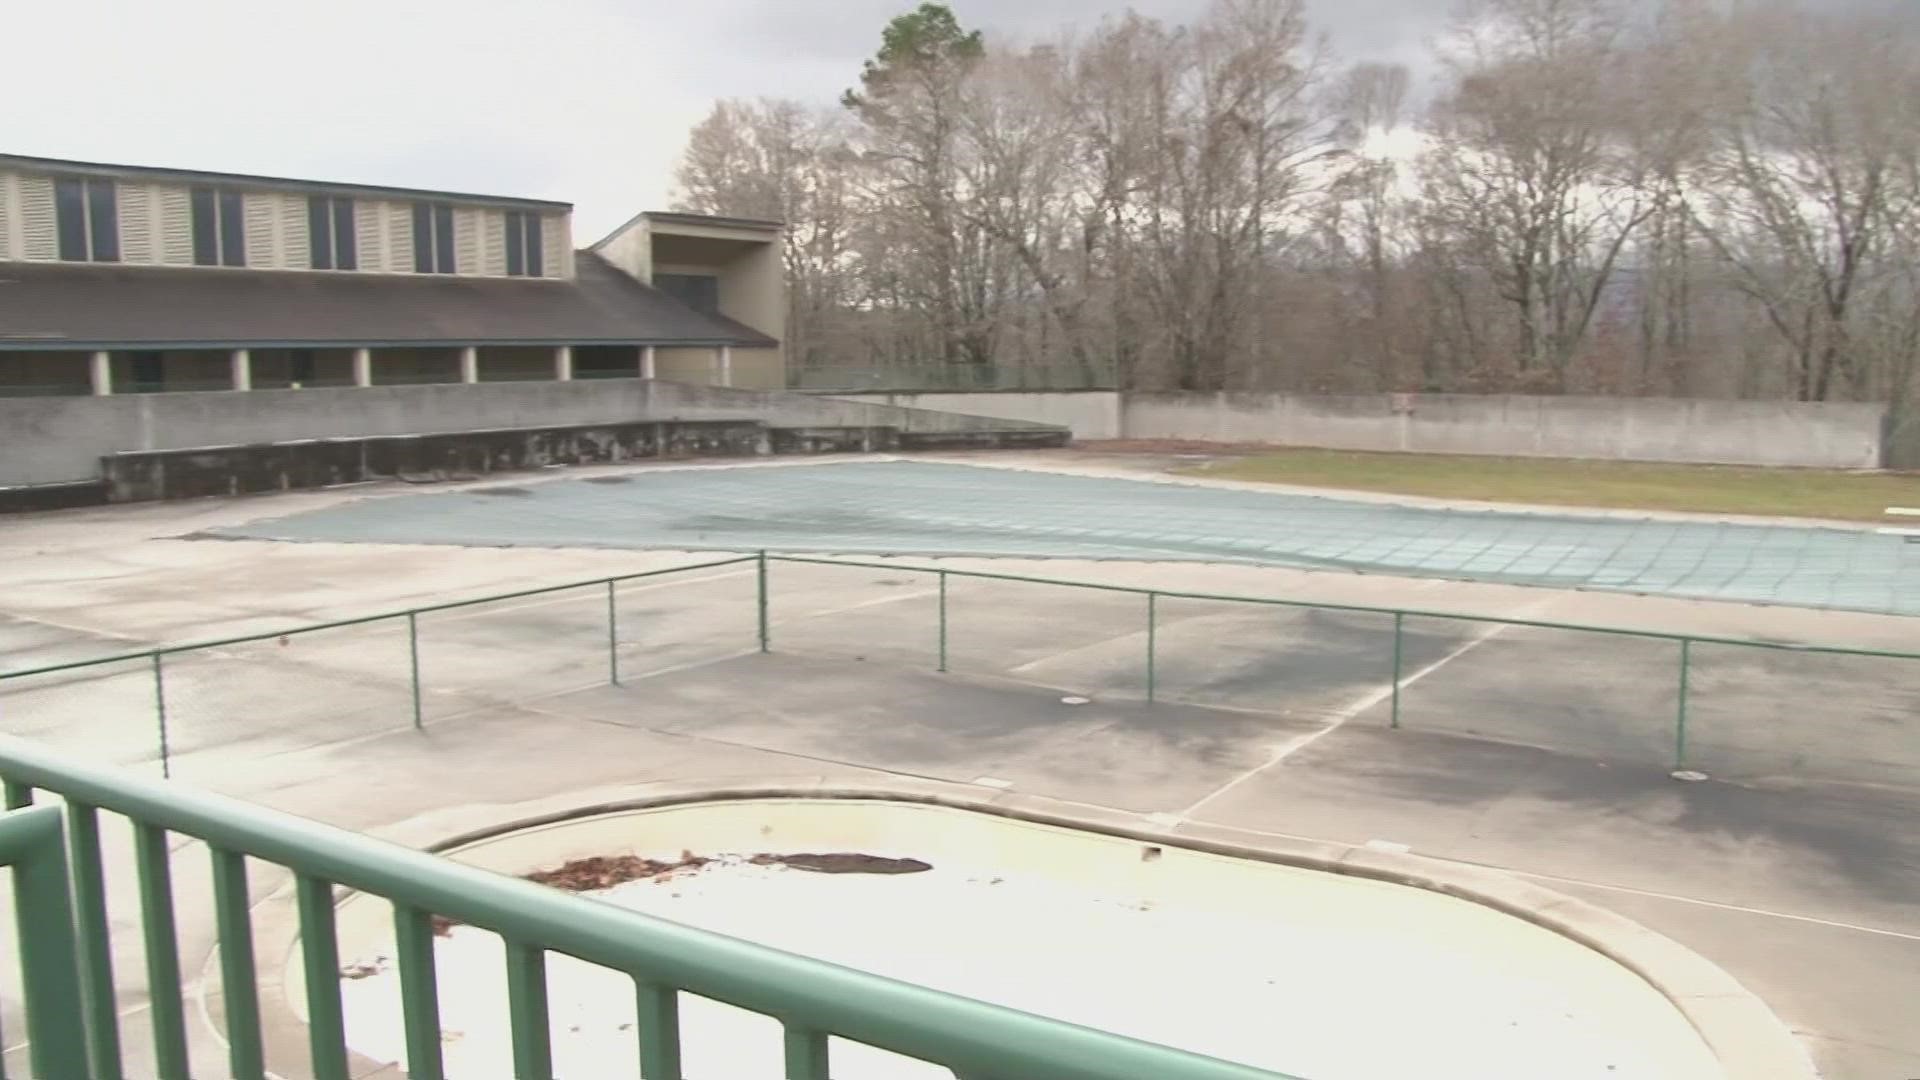 The public will be able to give their recommendations for an alternative, year-round outdoor recreational operation in replacement of the pool.